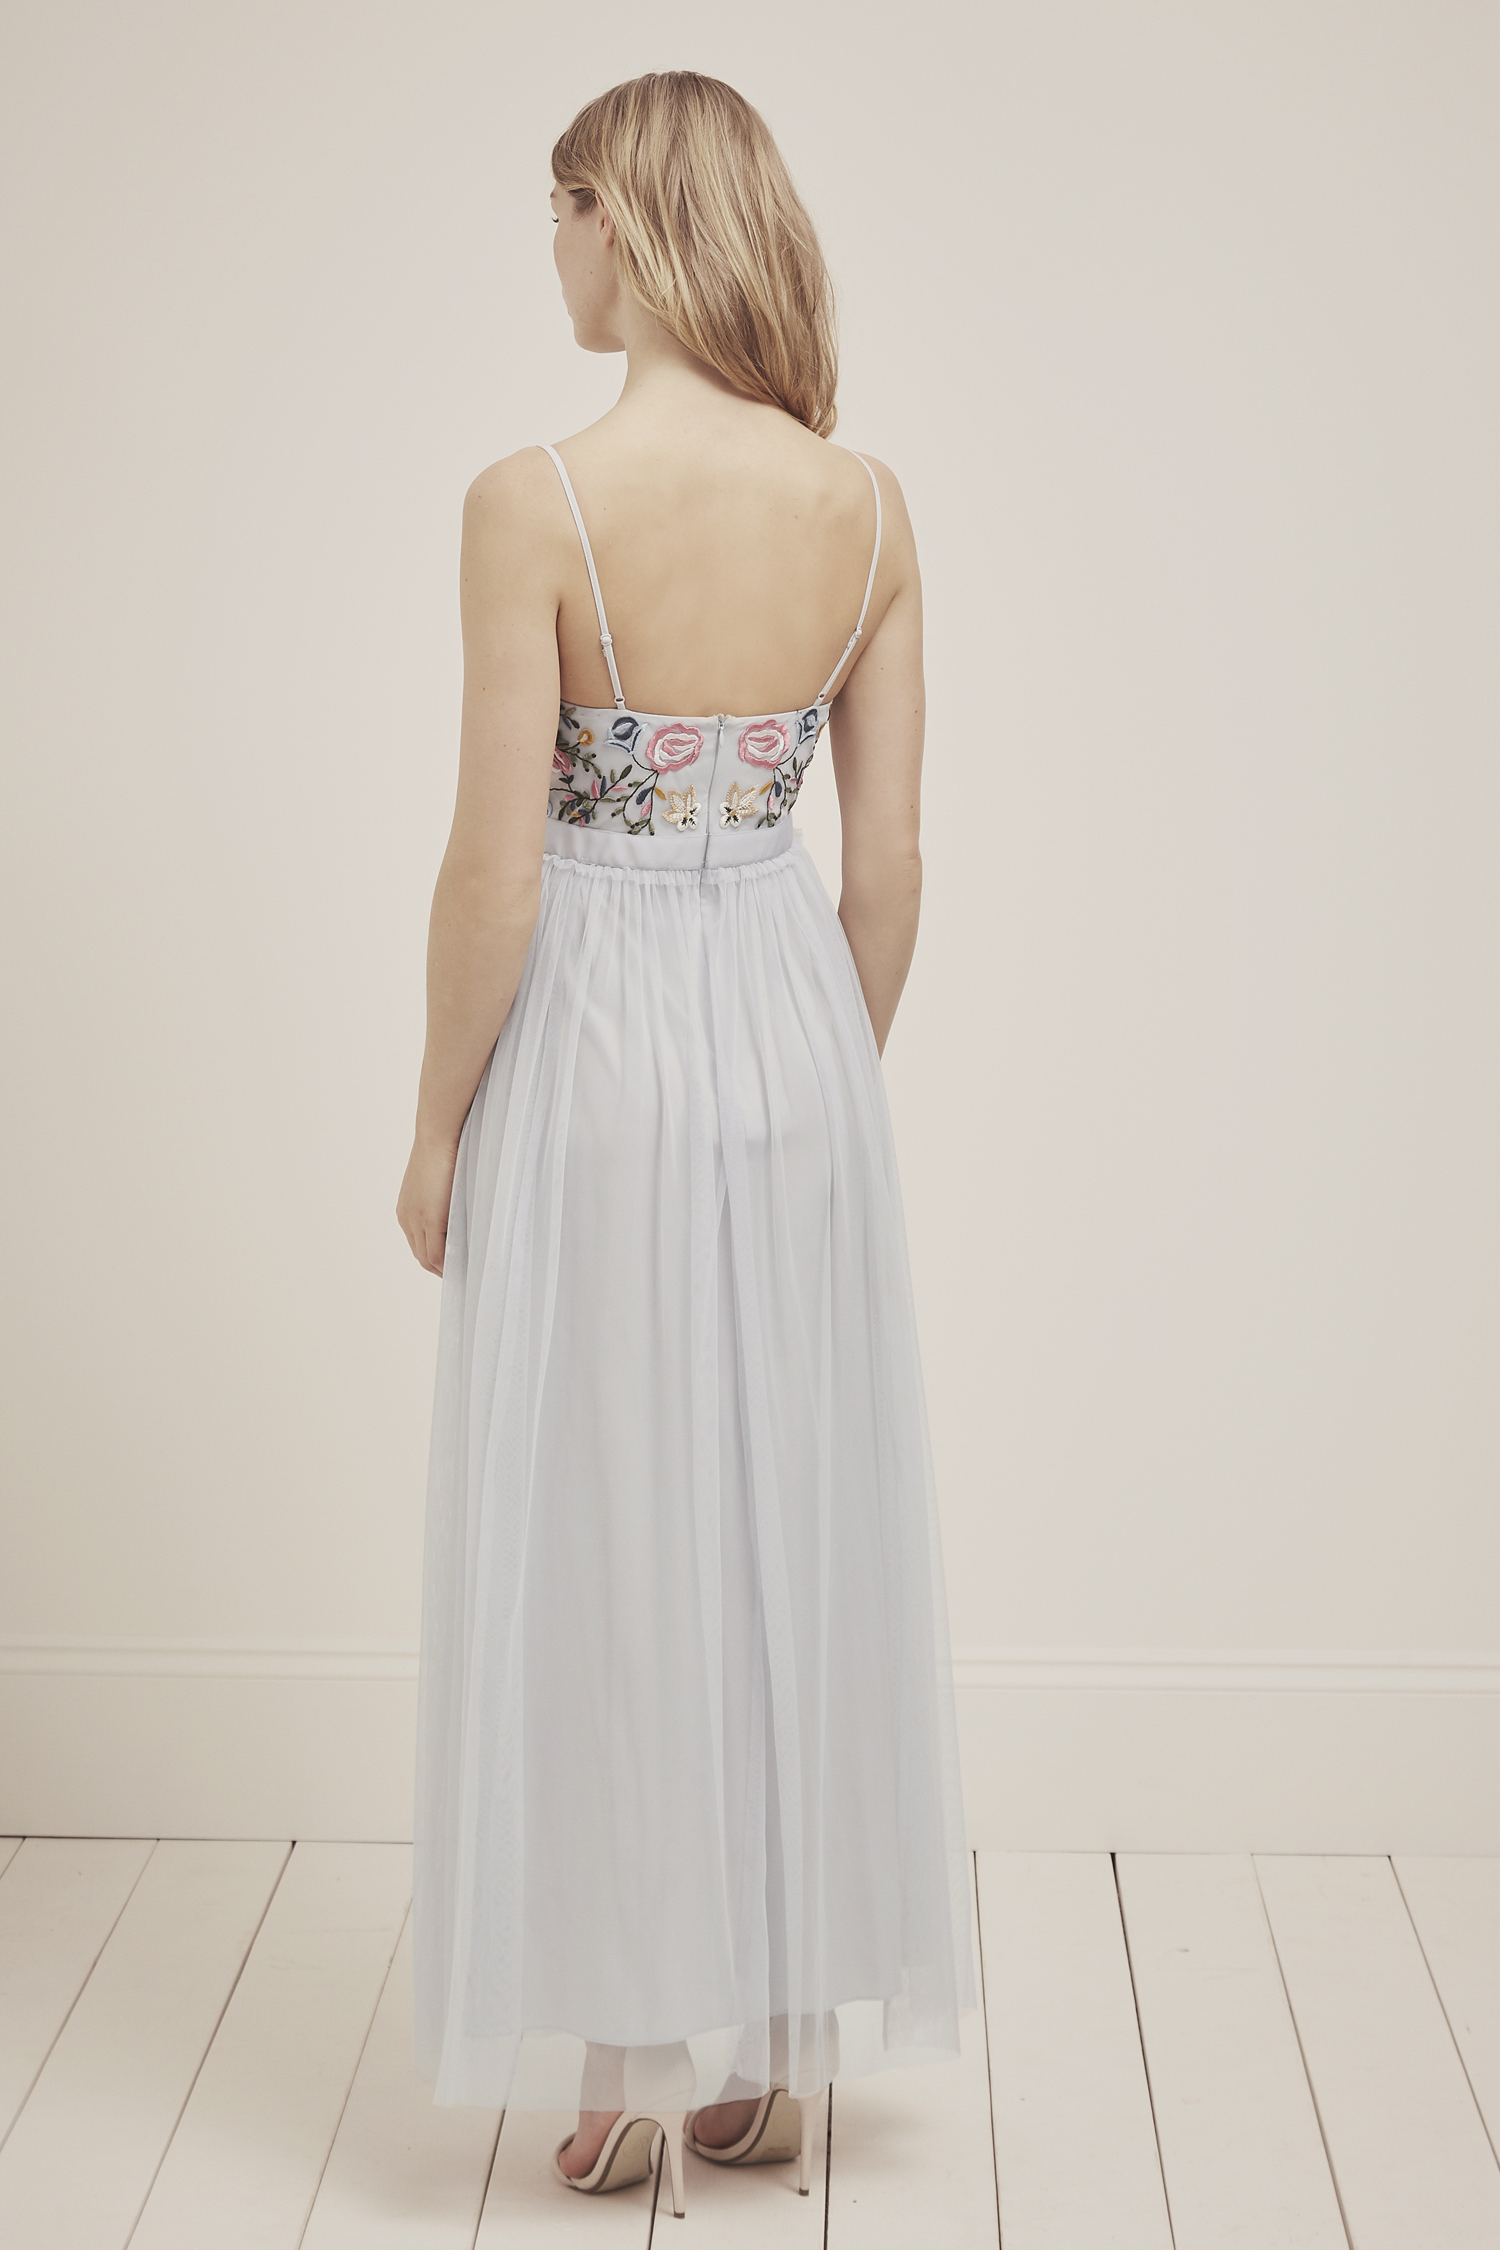 Chic Bridal and Bridesmaid Dresses From French Connection 10